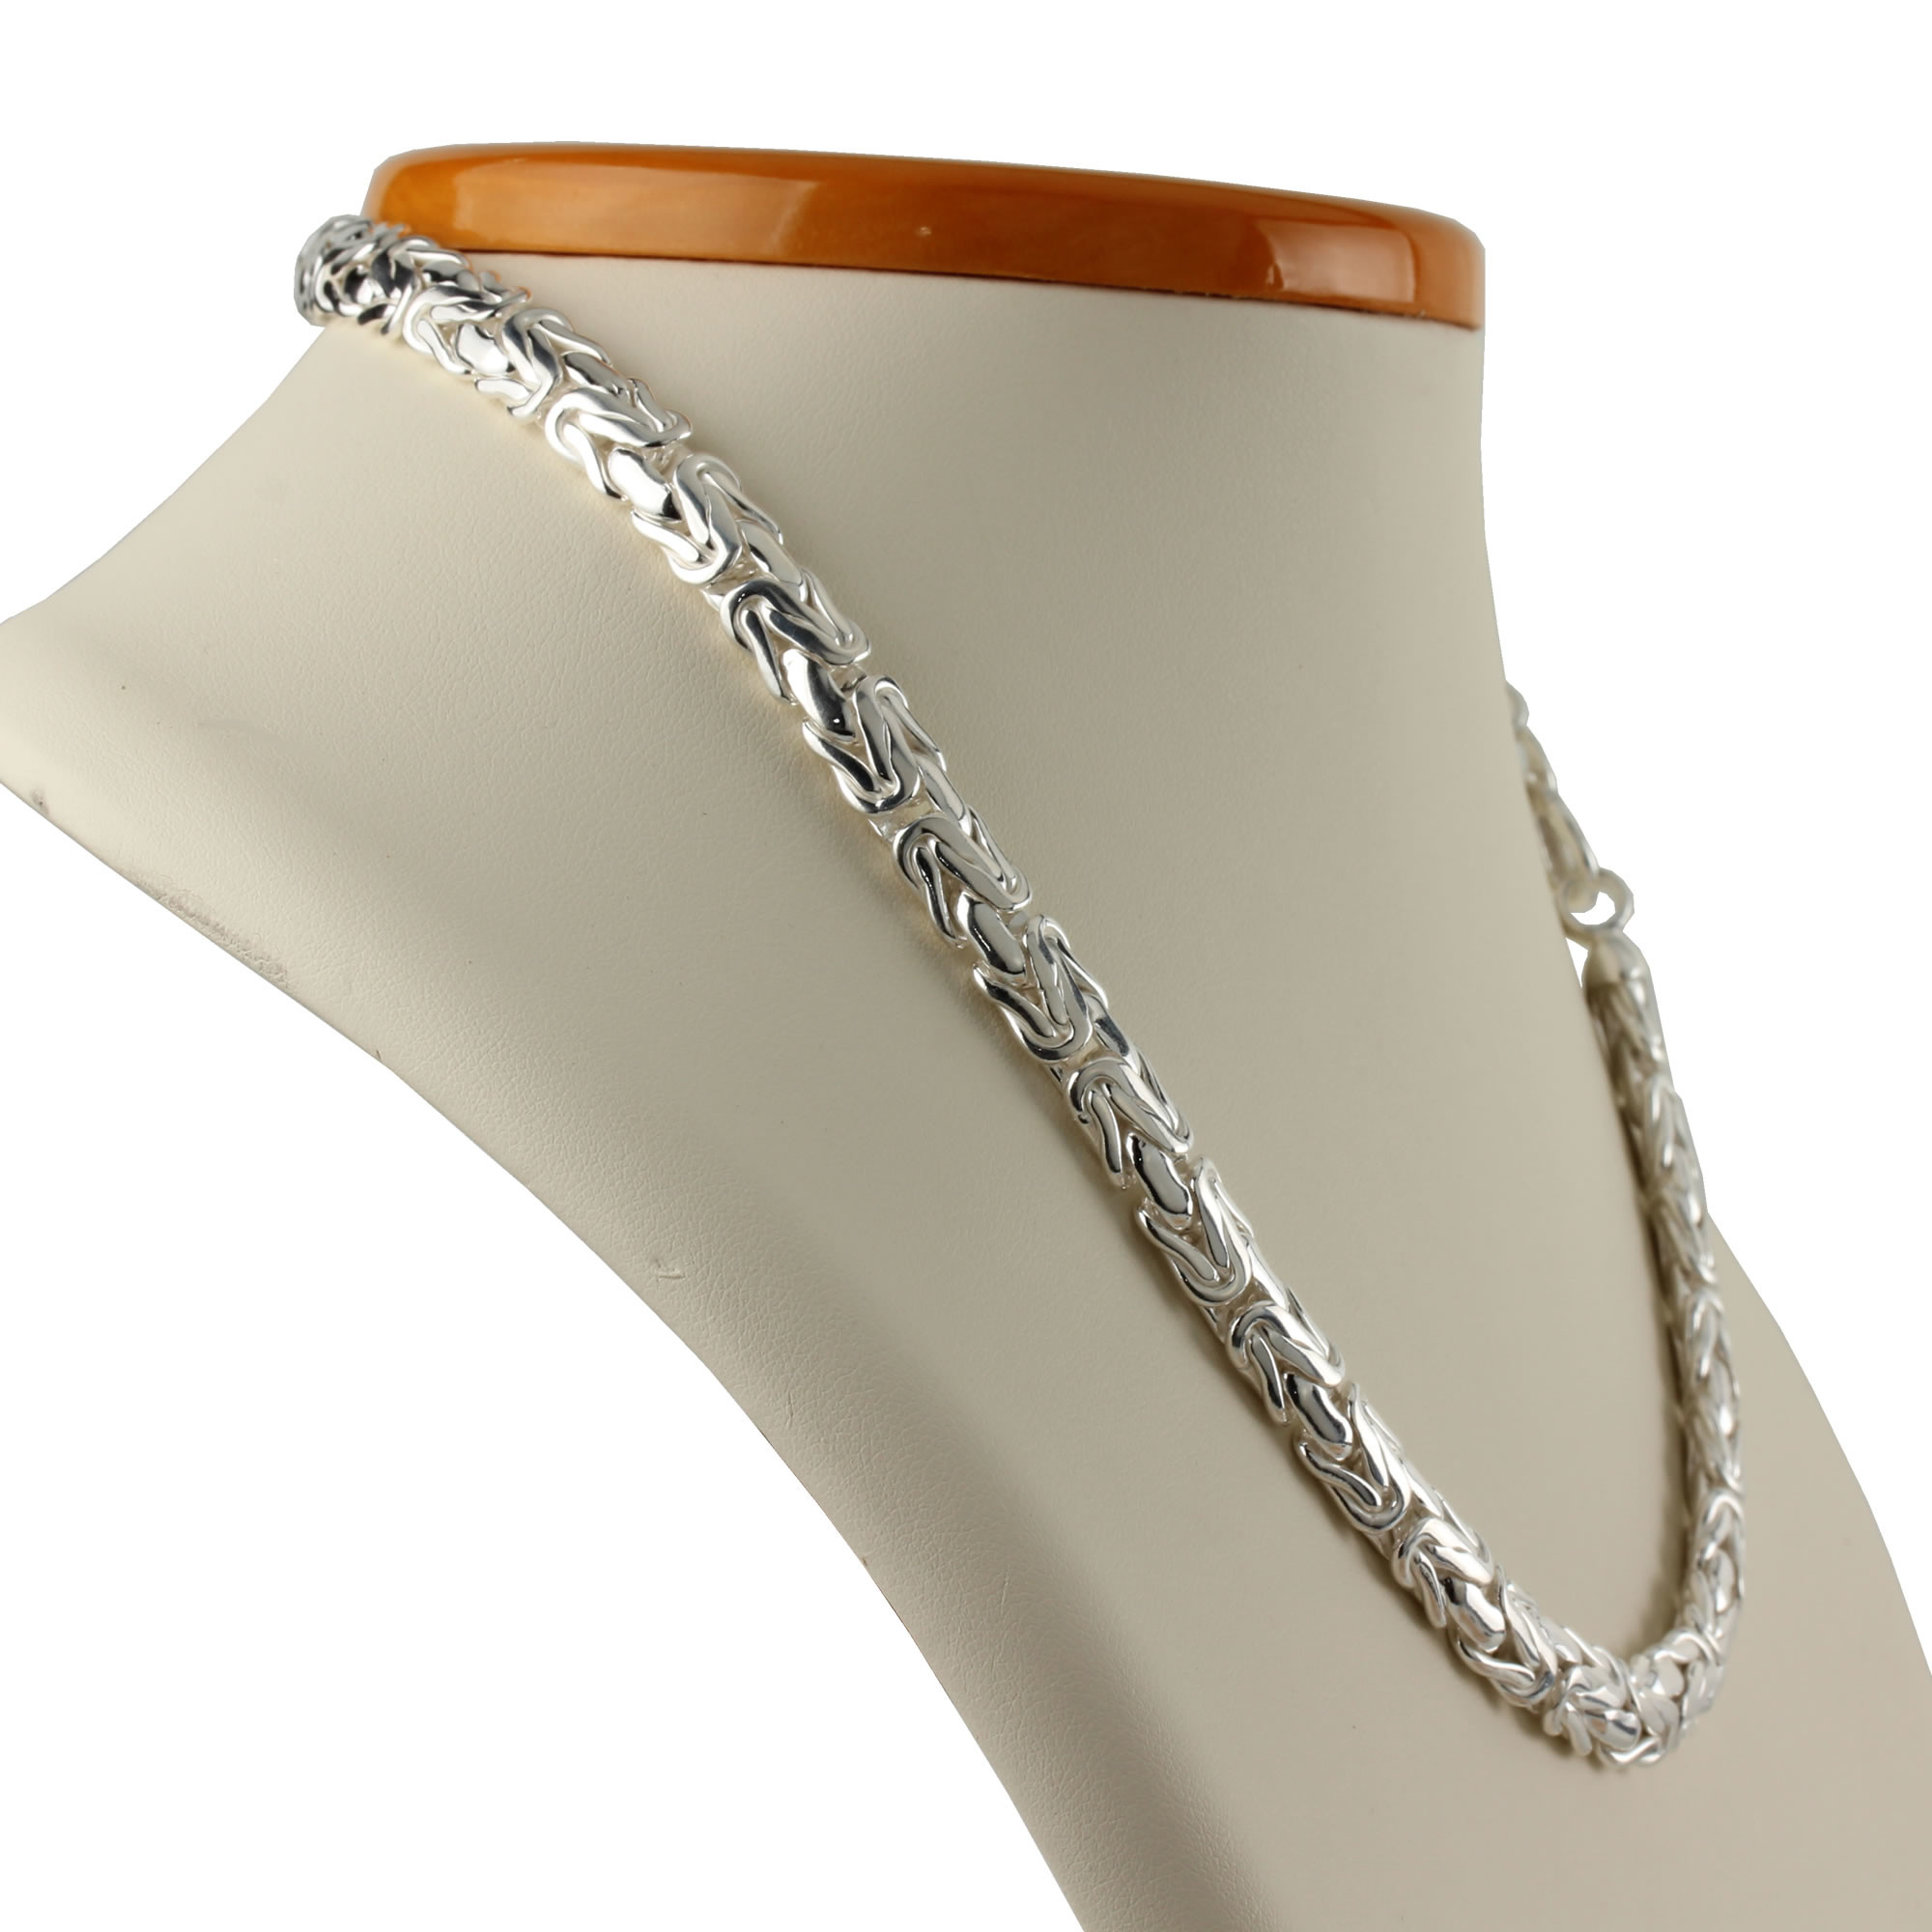 Men's Heavy Silver Byzantine Chain Necklace - 9mm Wide - 18 - 30 Inches